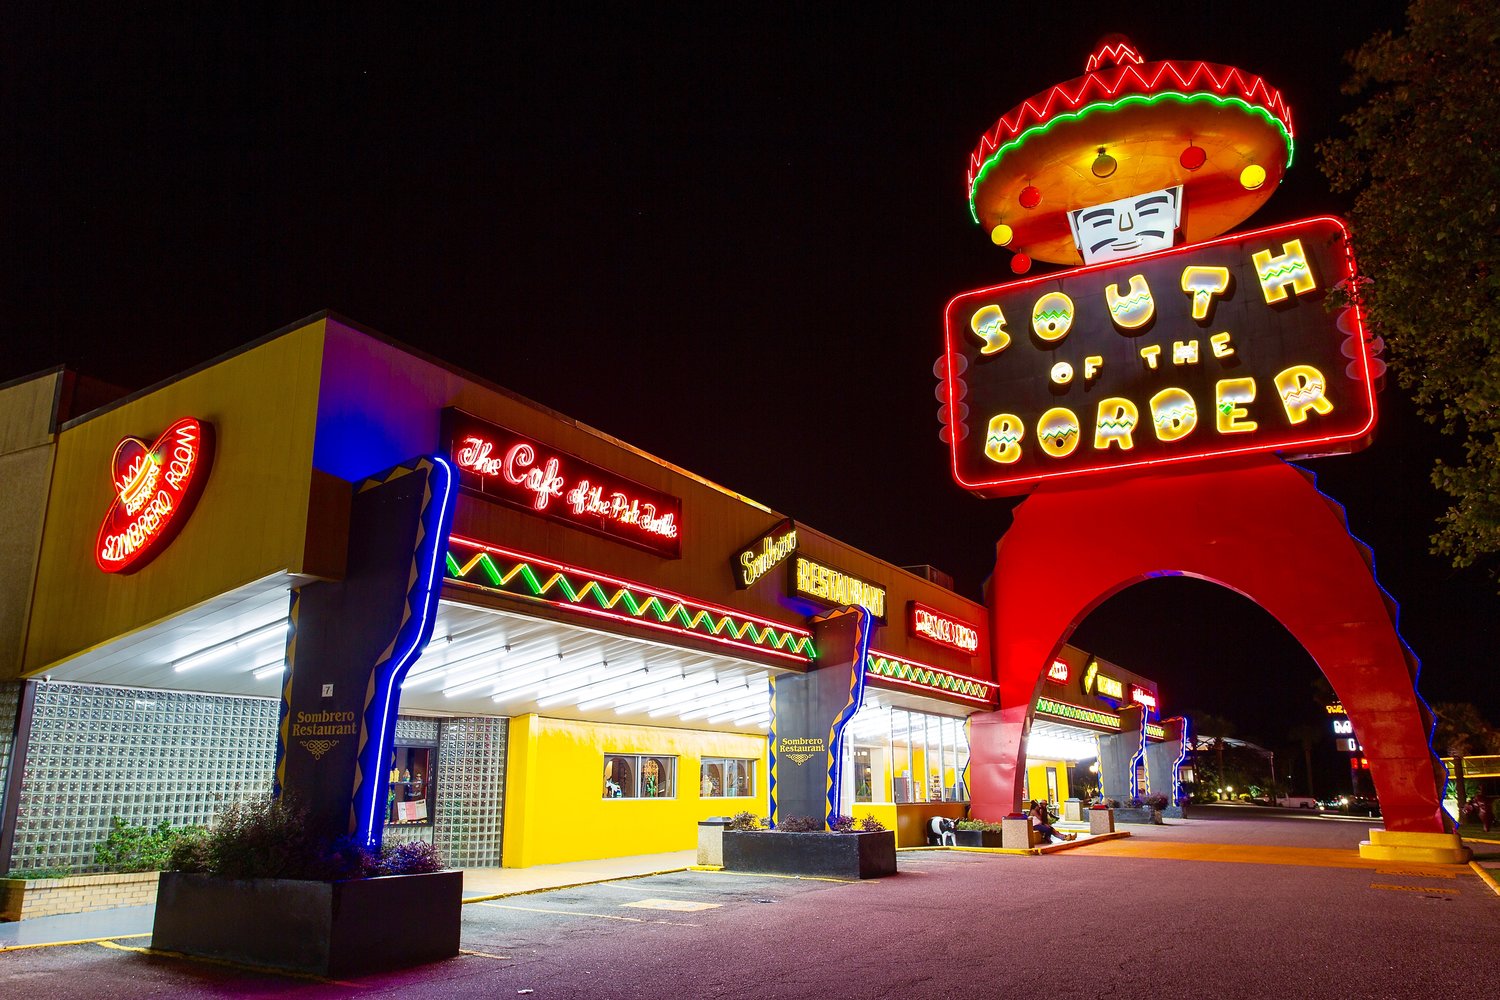 South of the Border Cafe